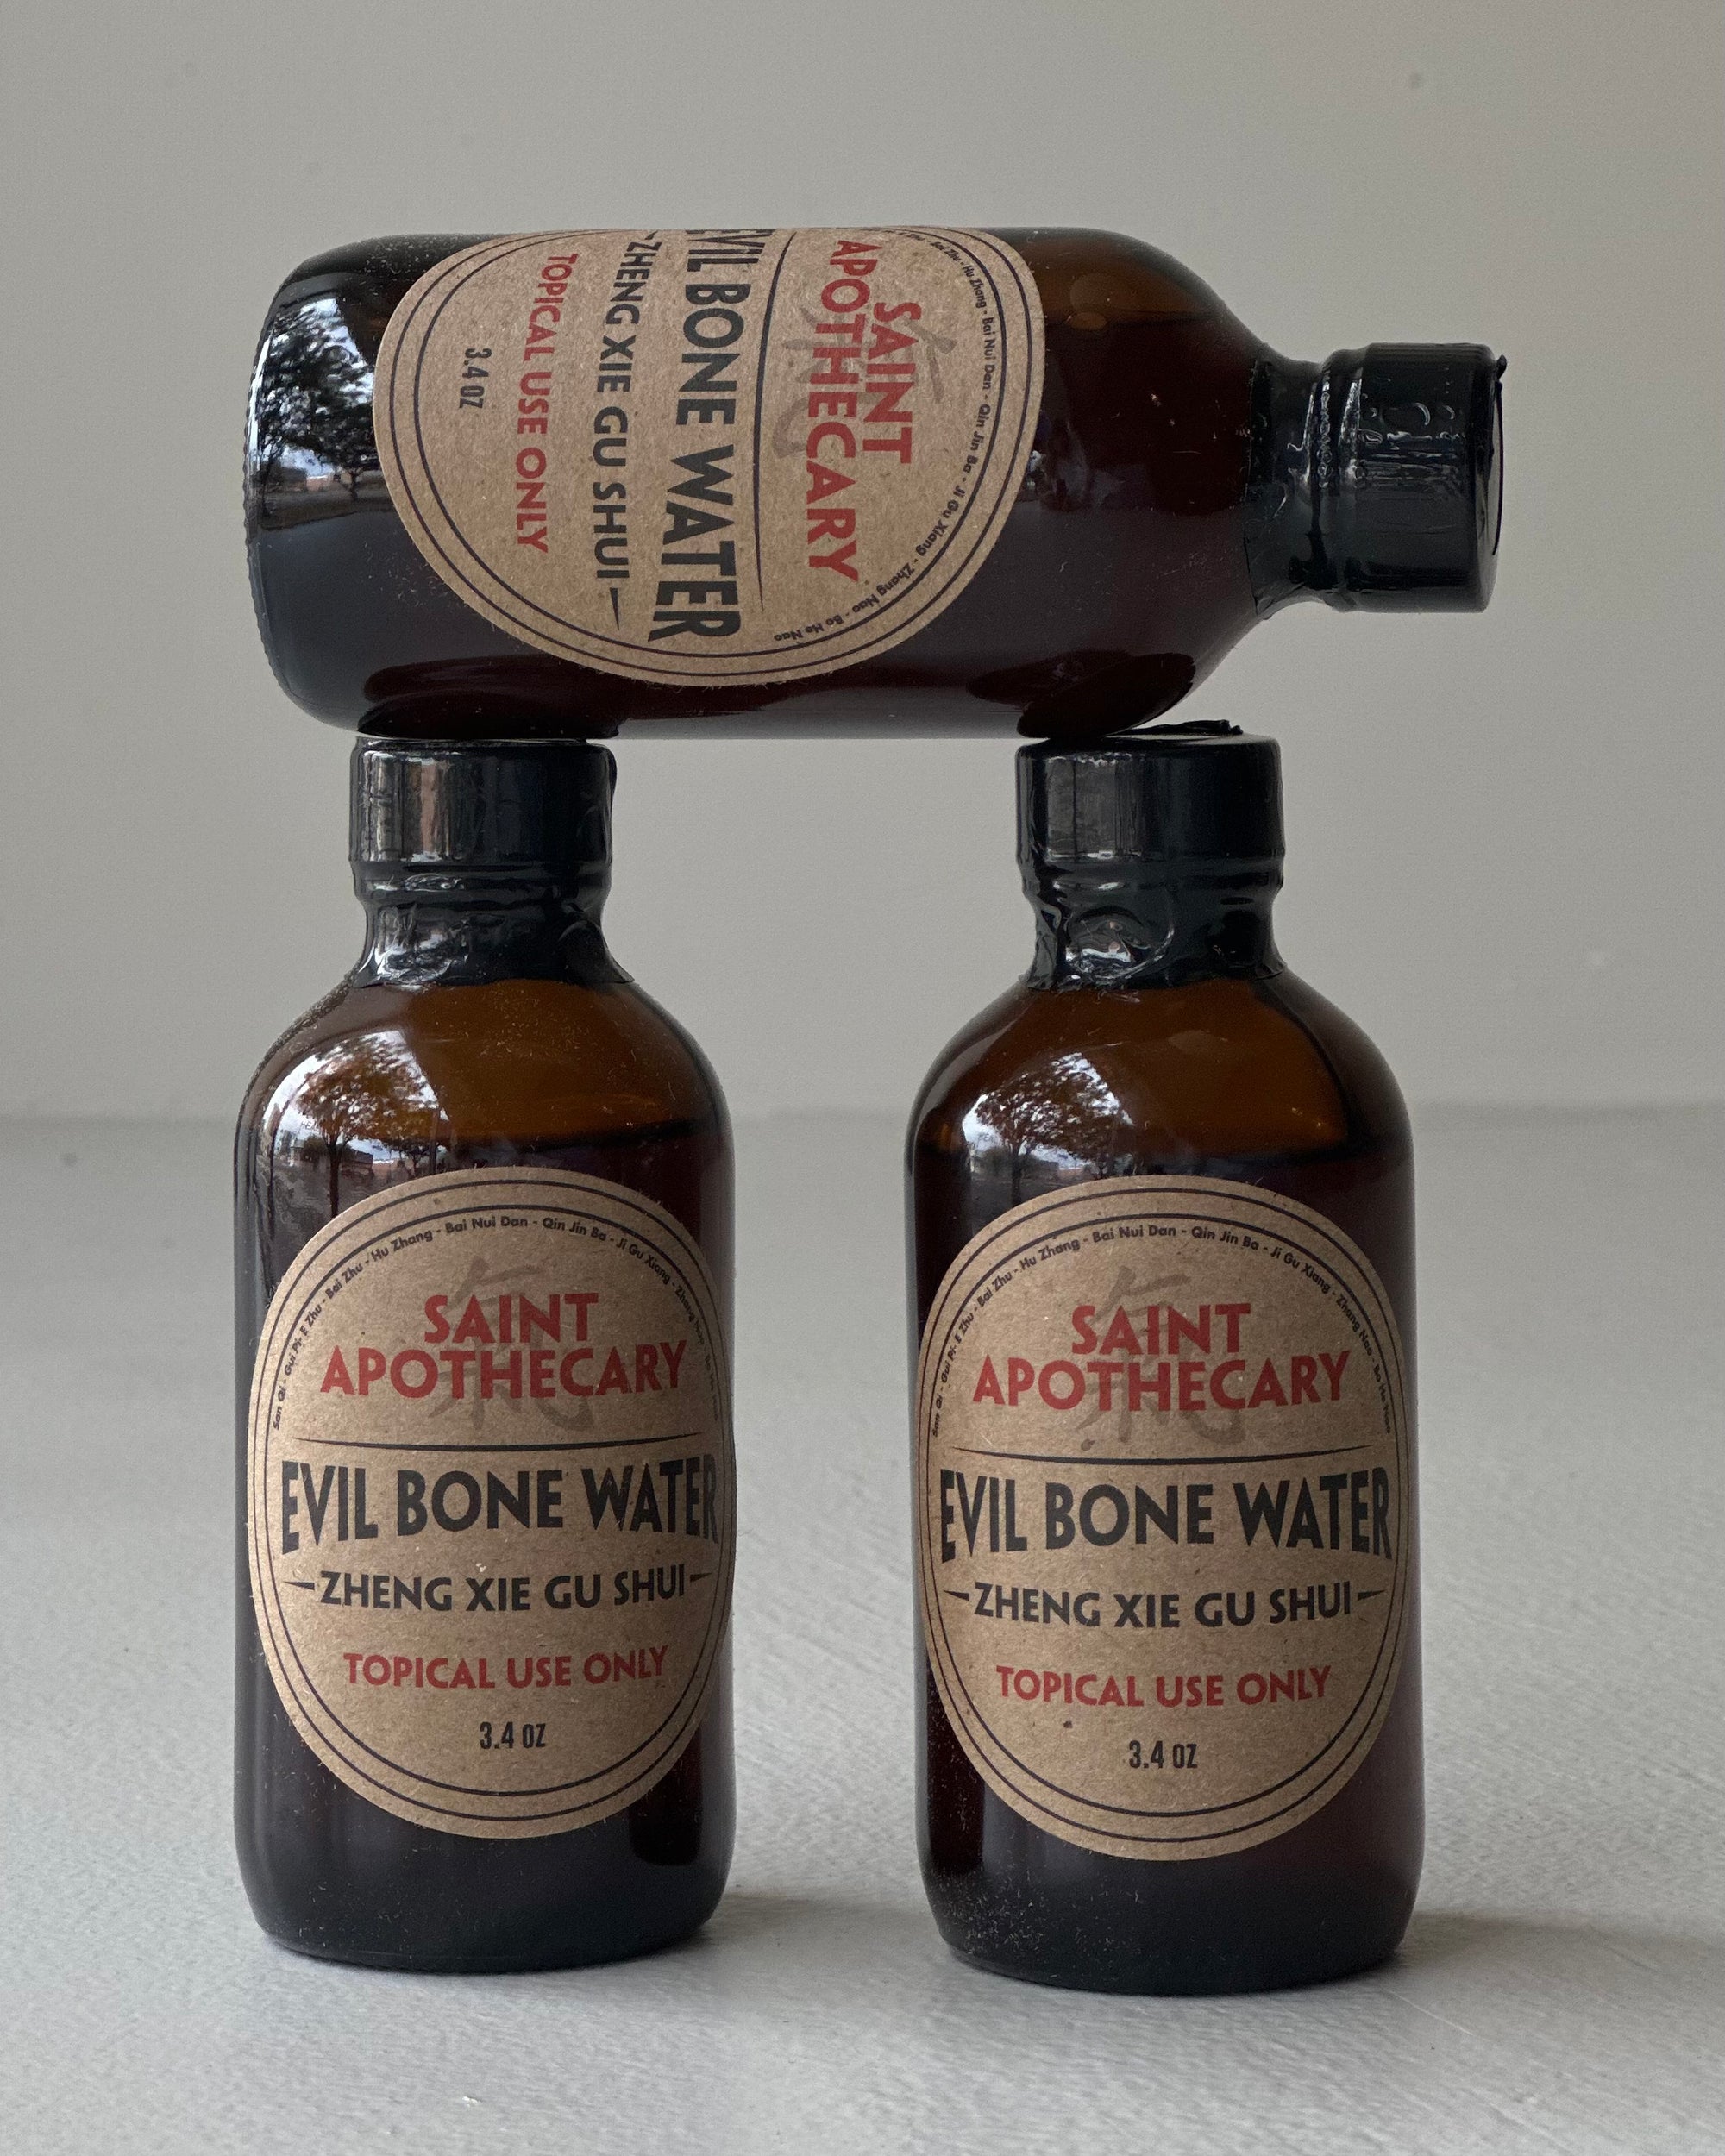 Three bottles of Evil Bone Water from Saint Apothecary, a traditional Chinese medicinal product for pain relief and healing